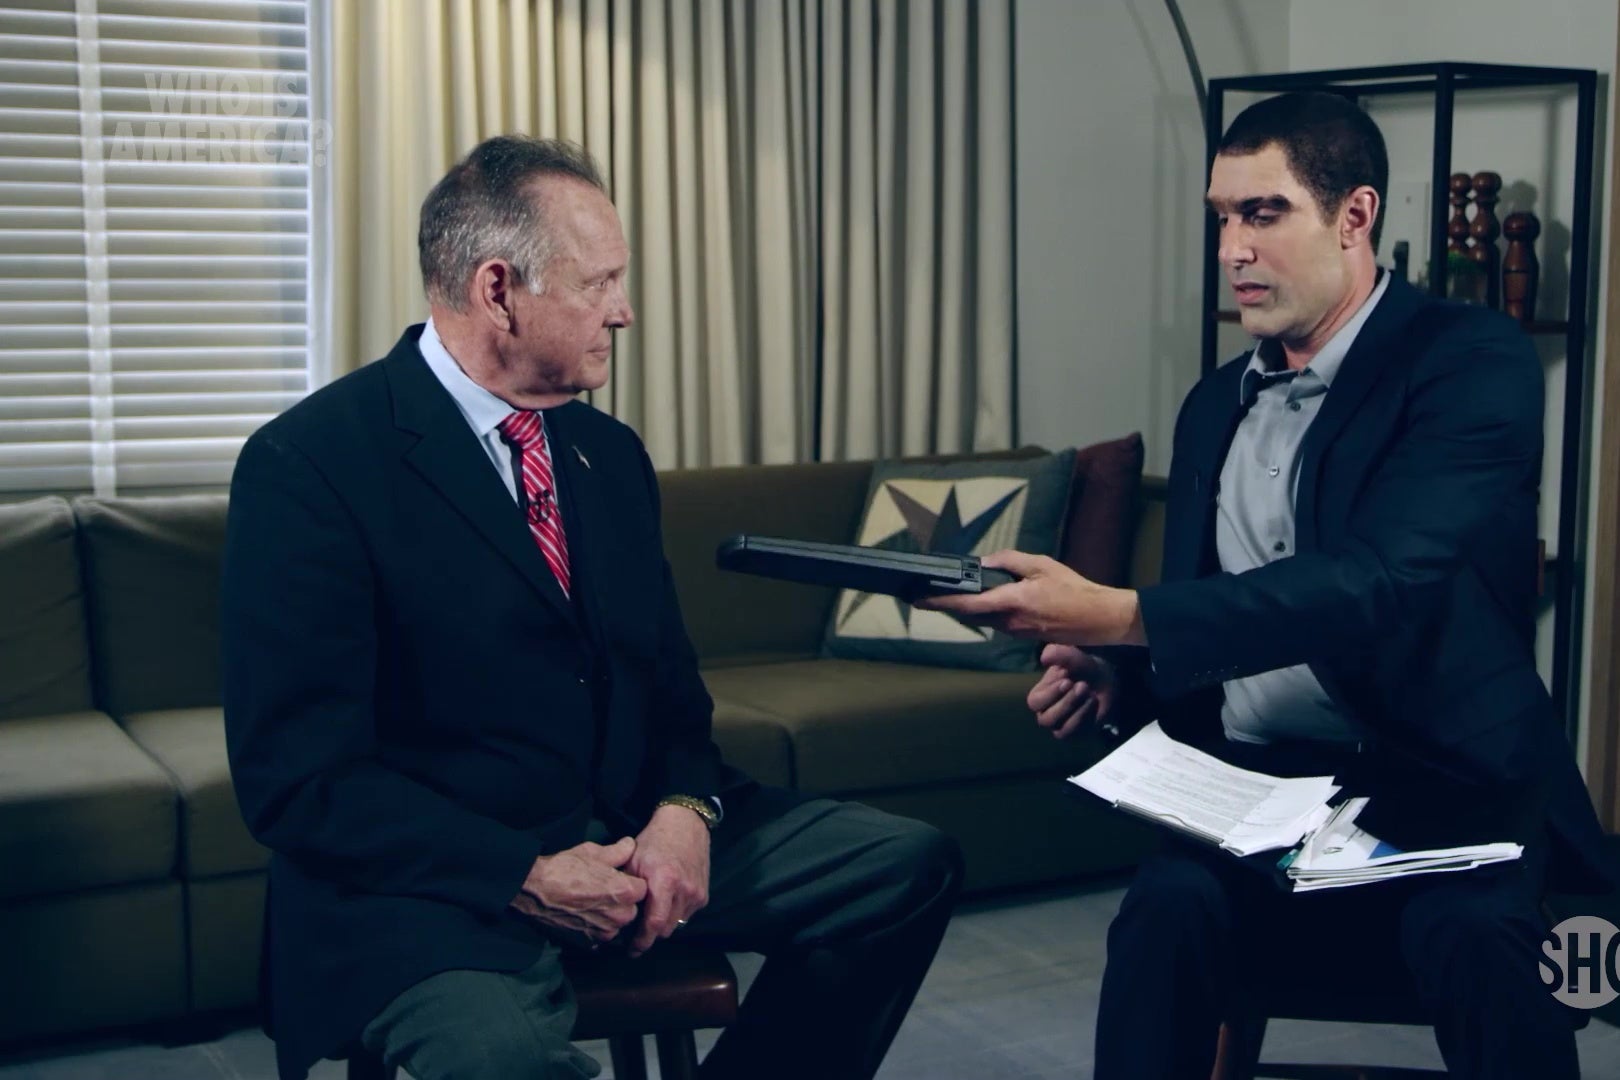 Roy Moore sits in a chair while Sacha Baron Cohen, wearing a ridiculous, lantern-jawed disguise, waves a metal-detector over him.